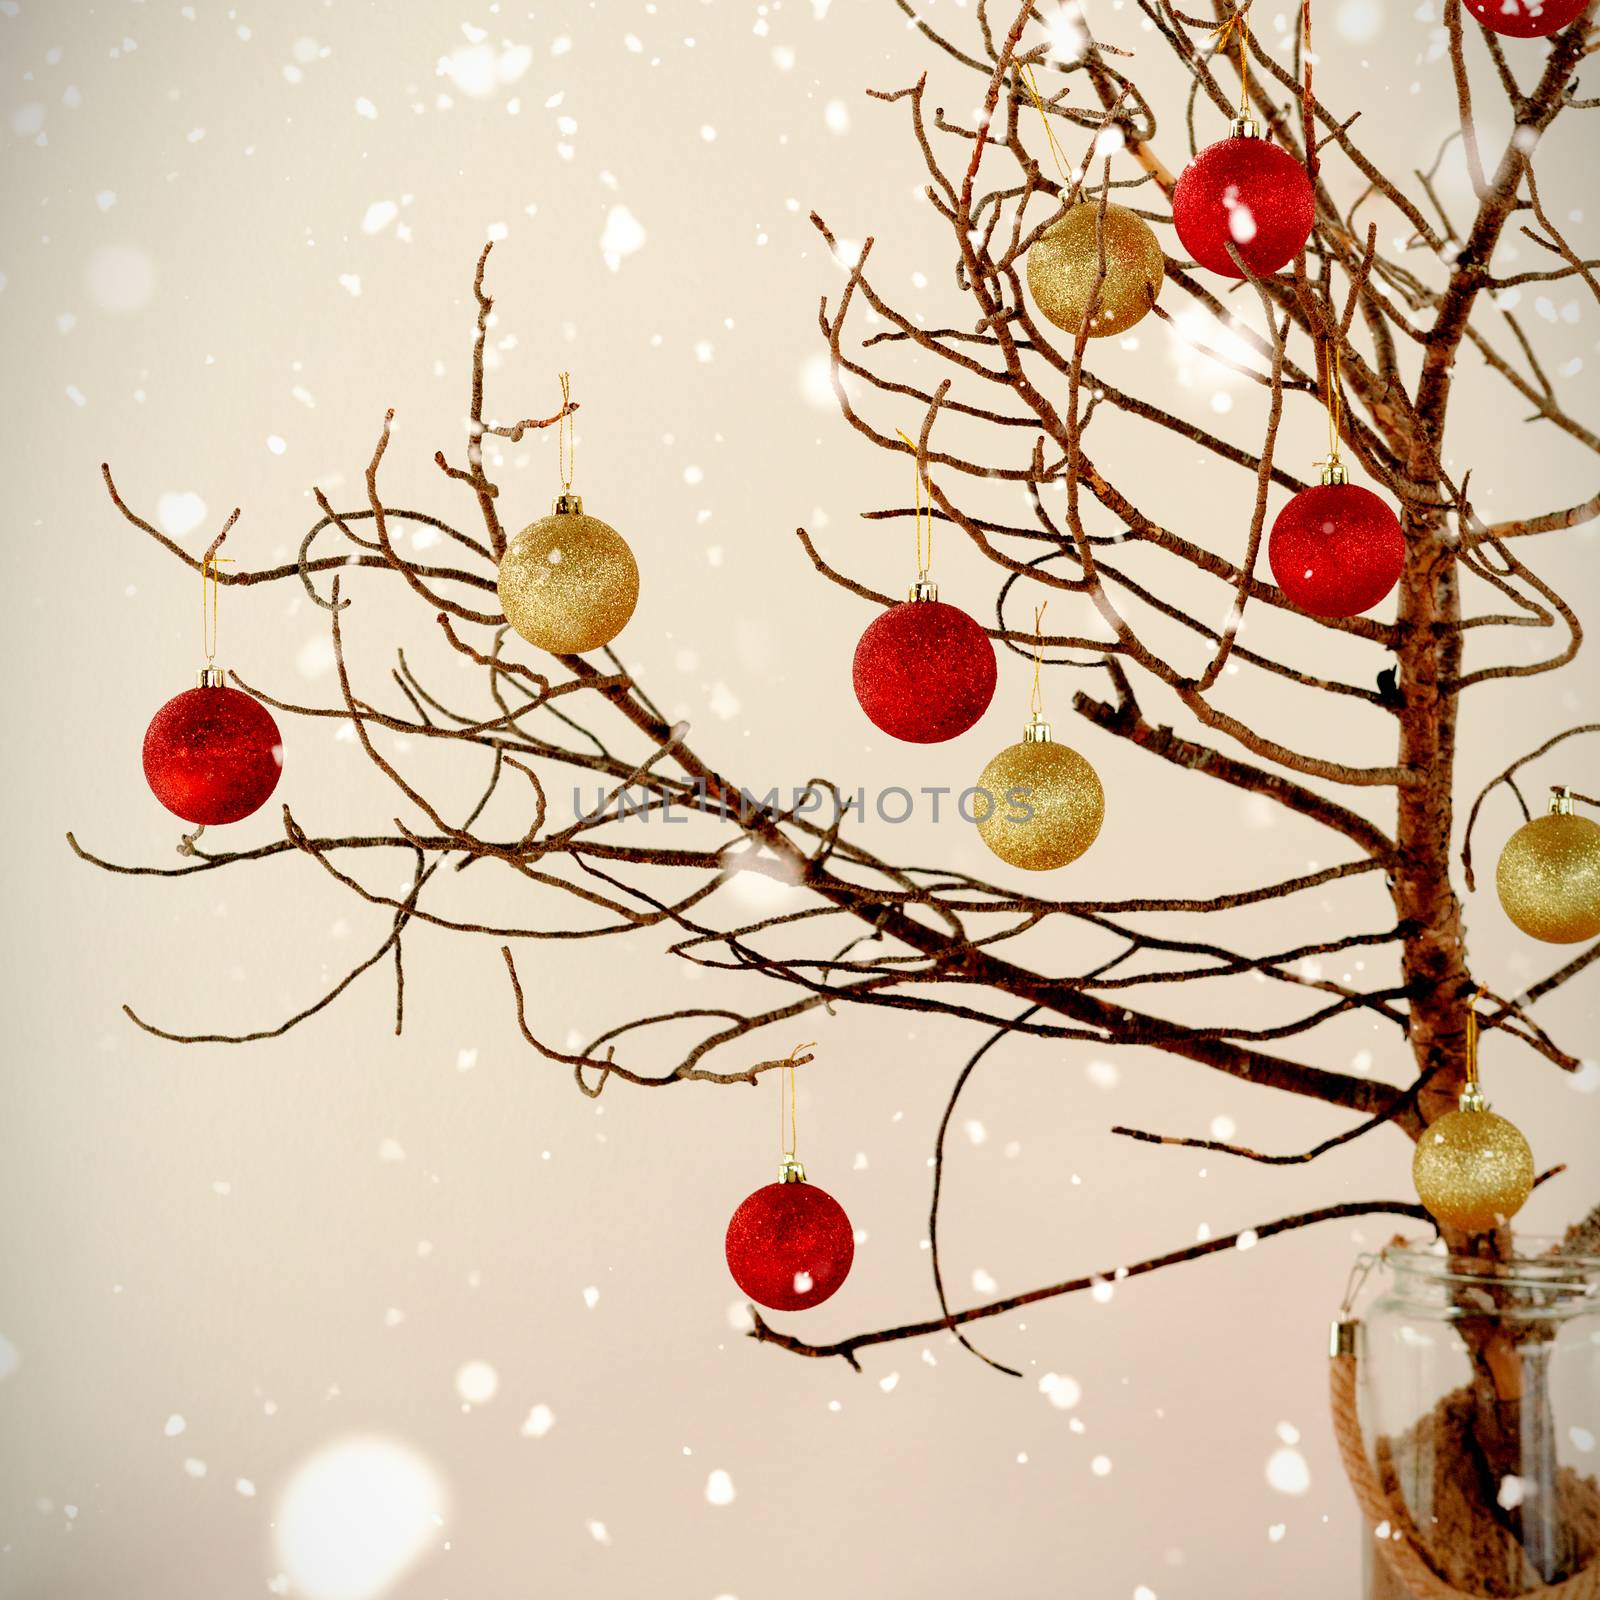 Snow falling against red and yellow christmas balls